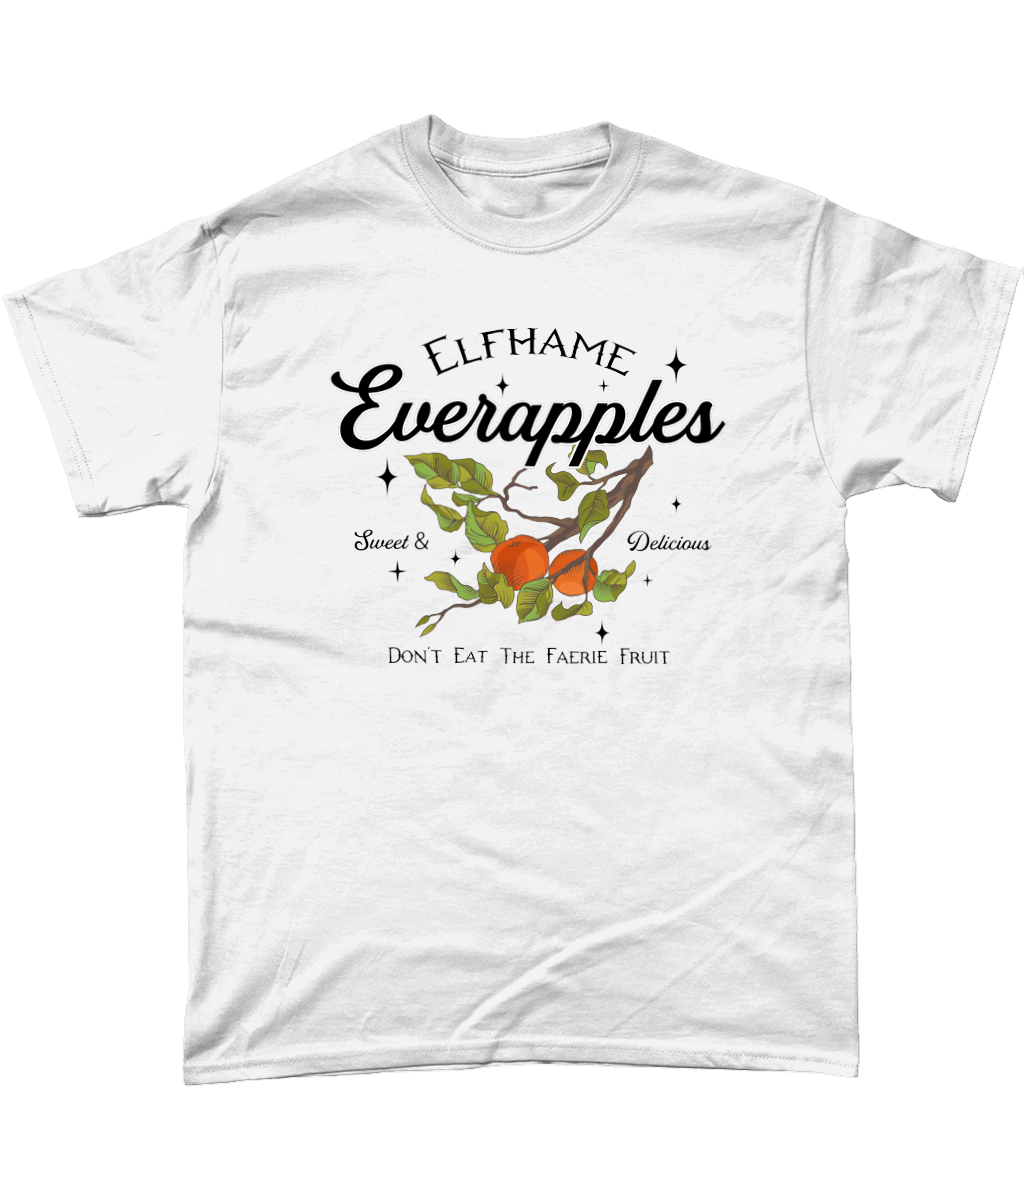 Elfhame Everapples 'Folk Of Air' Inspired Unisex Fit T-Shirt